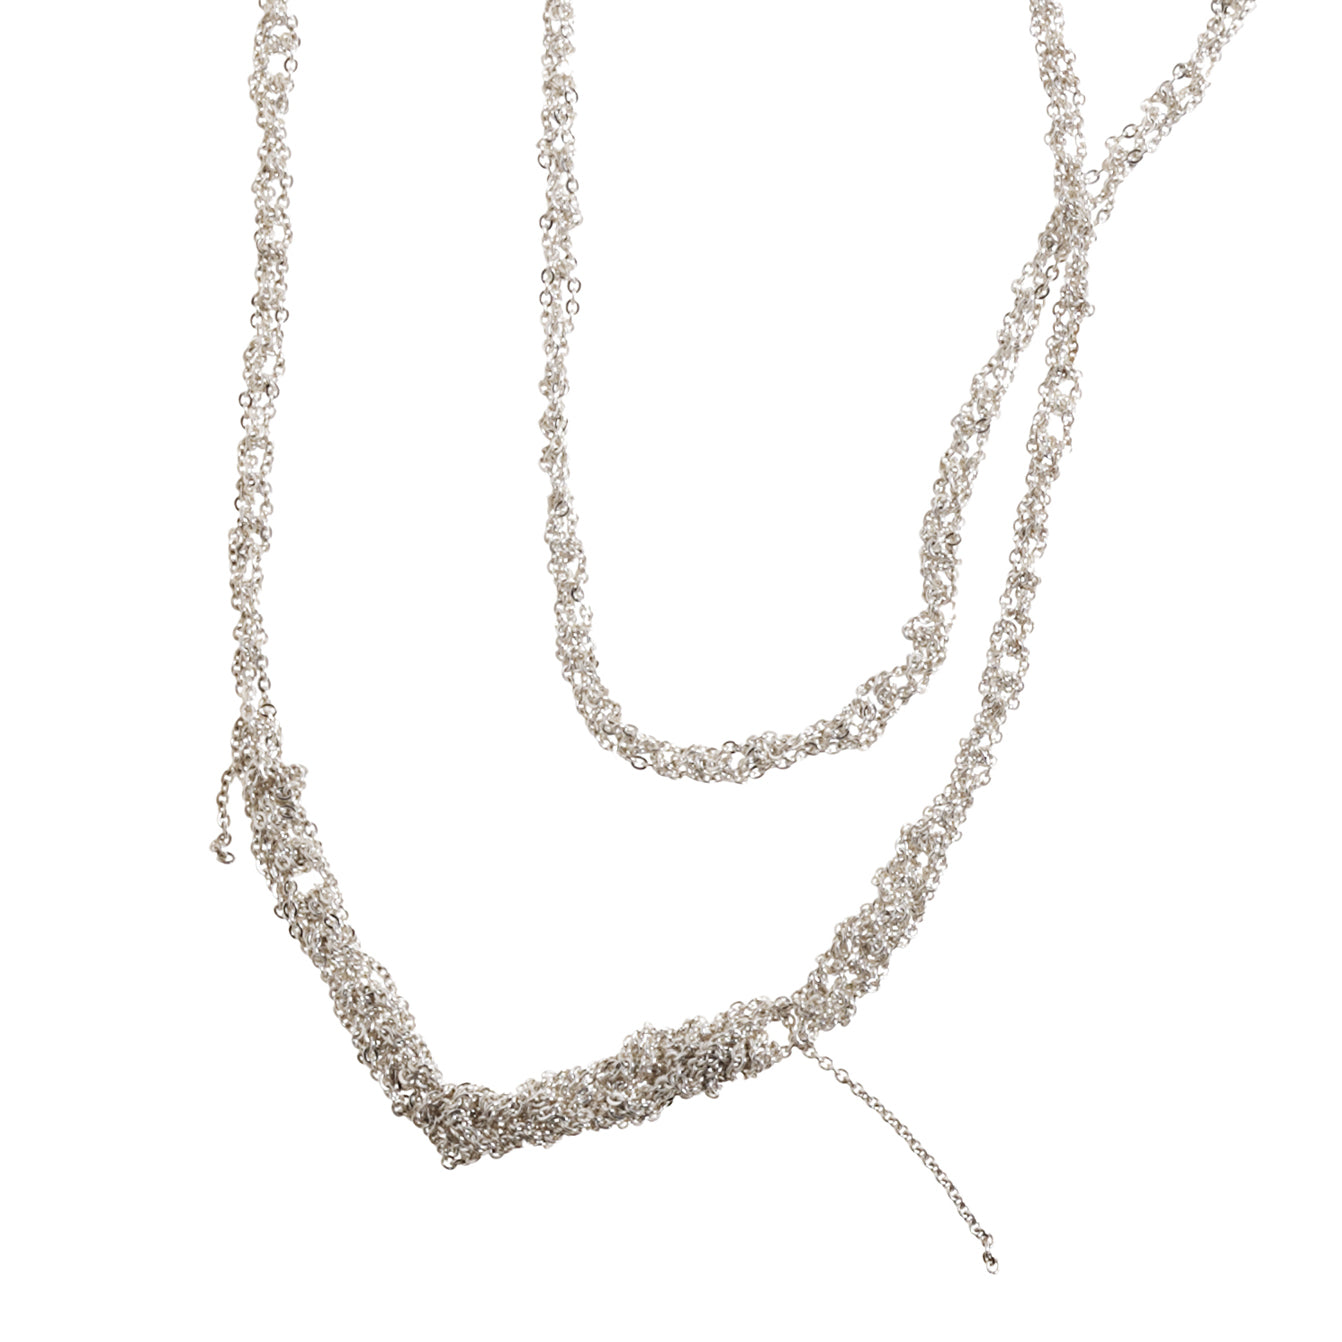 4-Tone Simple Necklace in Silver